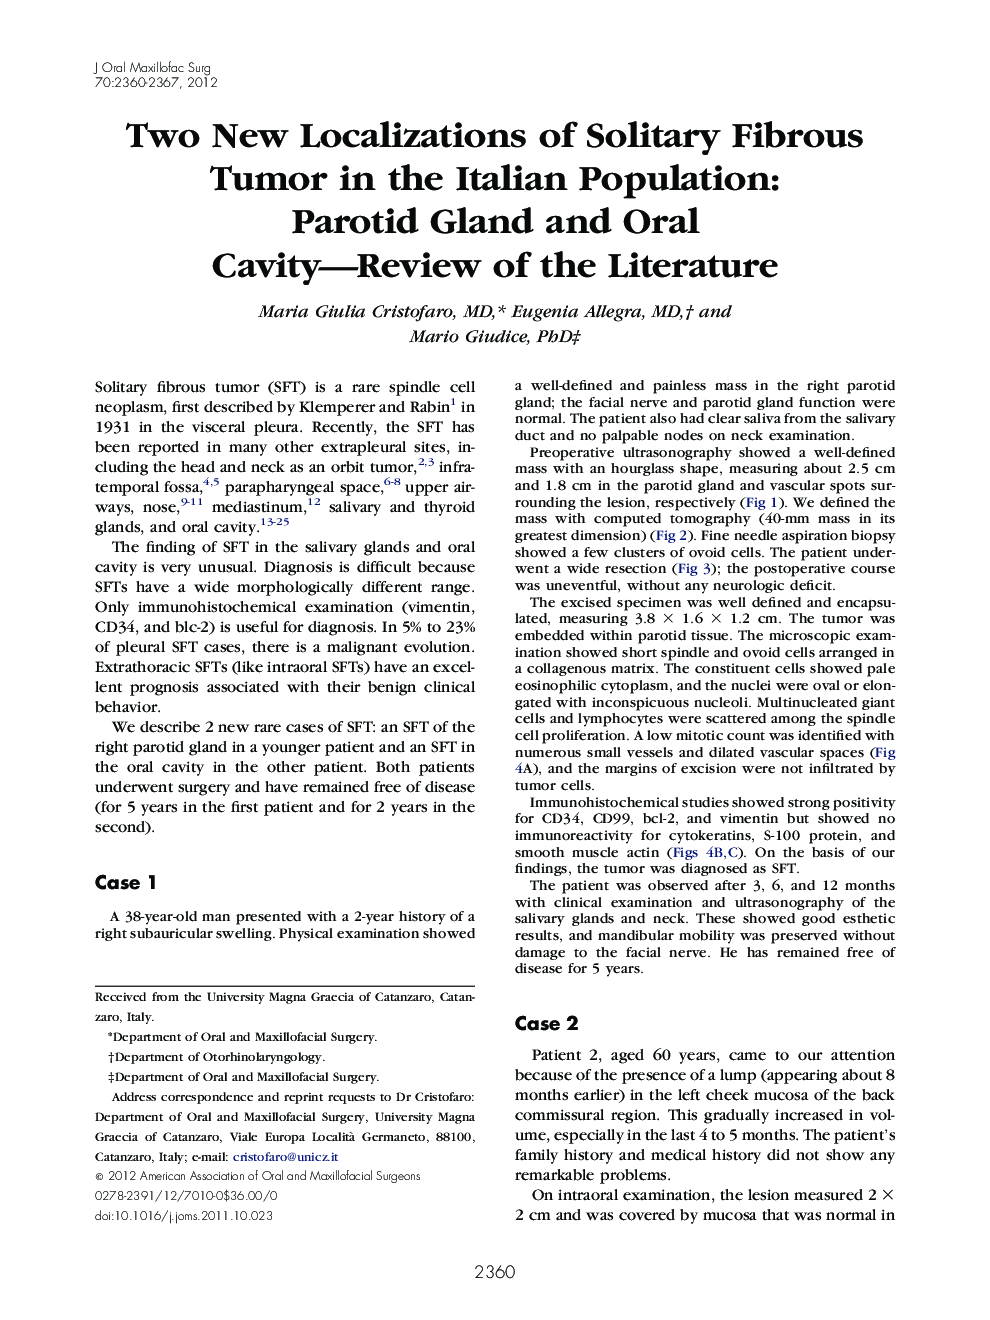 Two New Localizations of Solitary Fibrous Tumor in the Italian Population: Parotid Gland and Oral Cavity-Review of the Literature